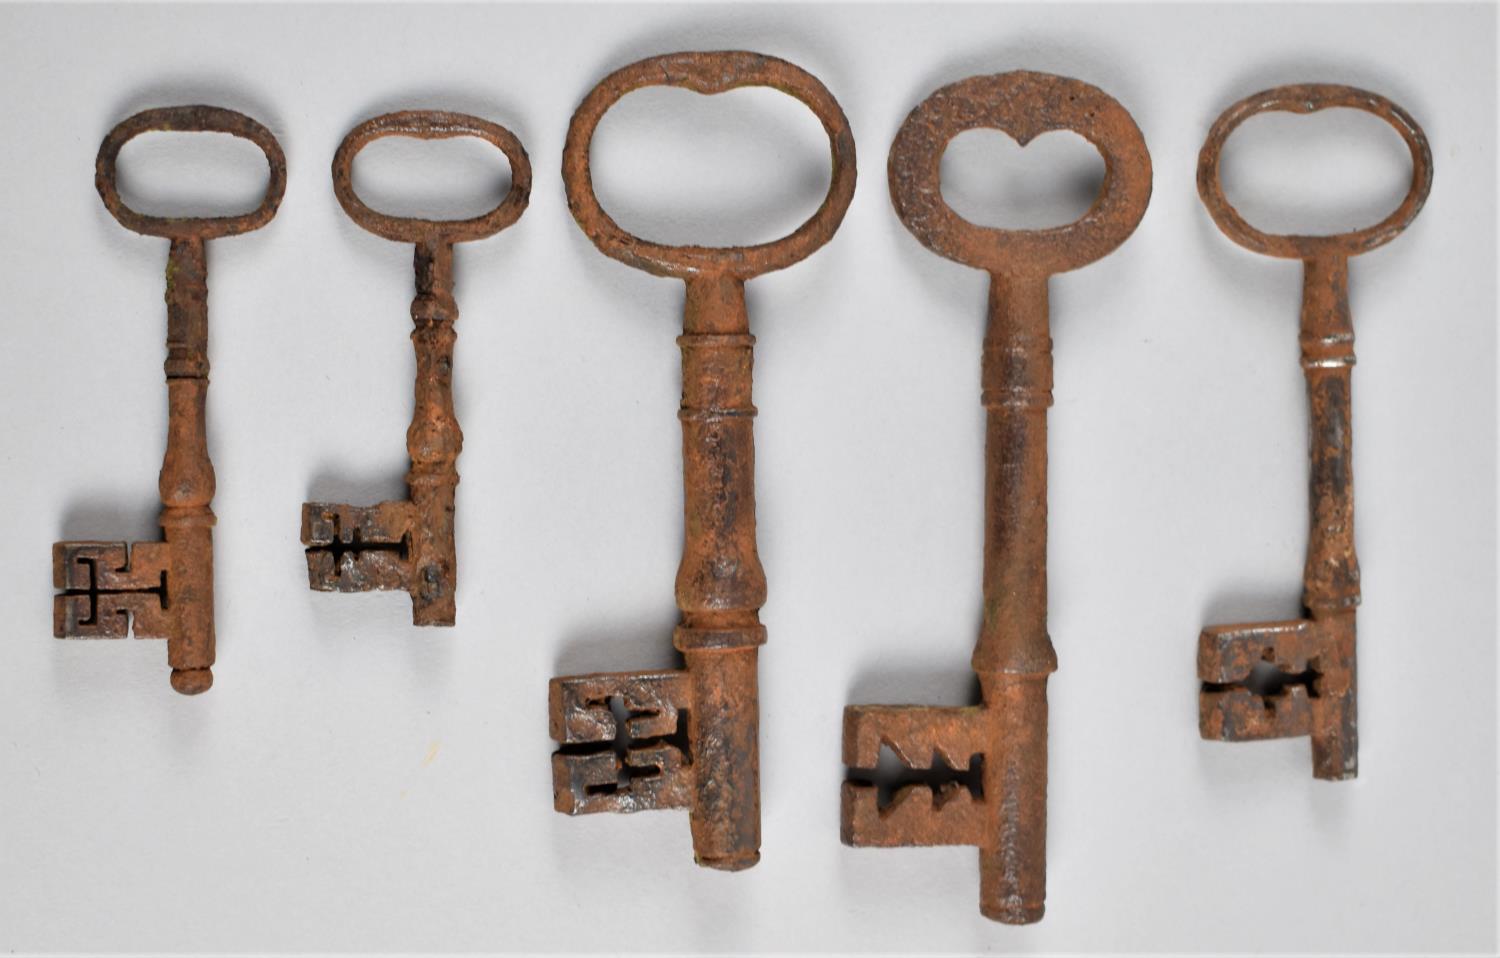 A Collection of Five Vintage Iron Door Keys